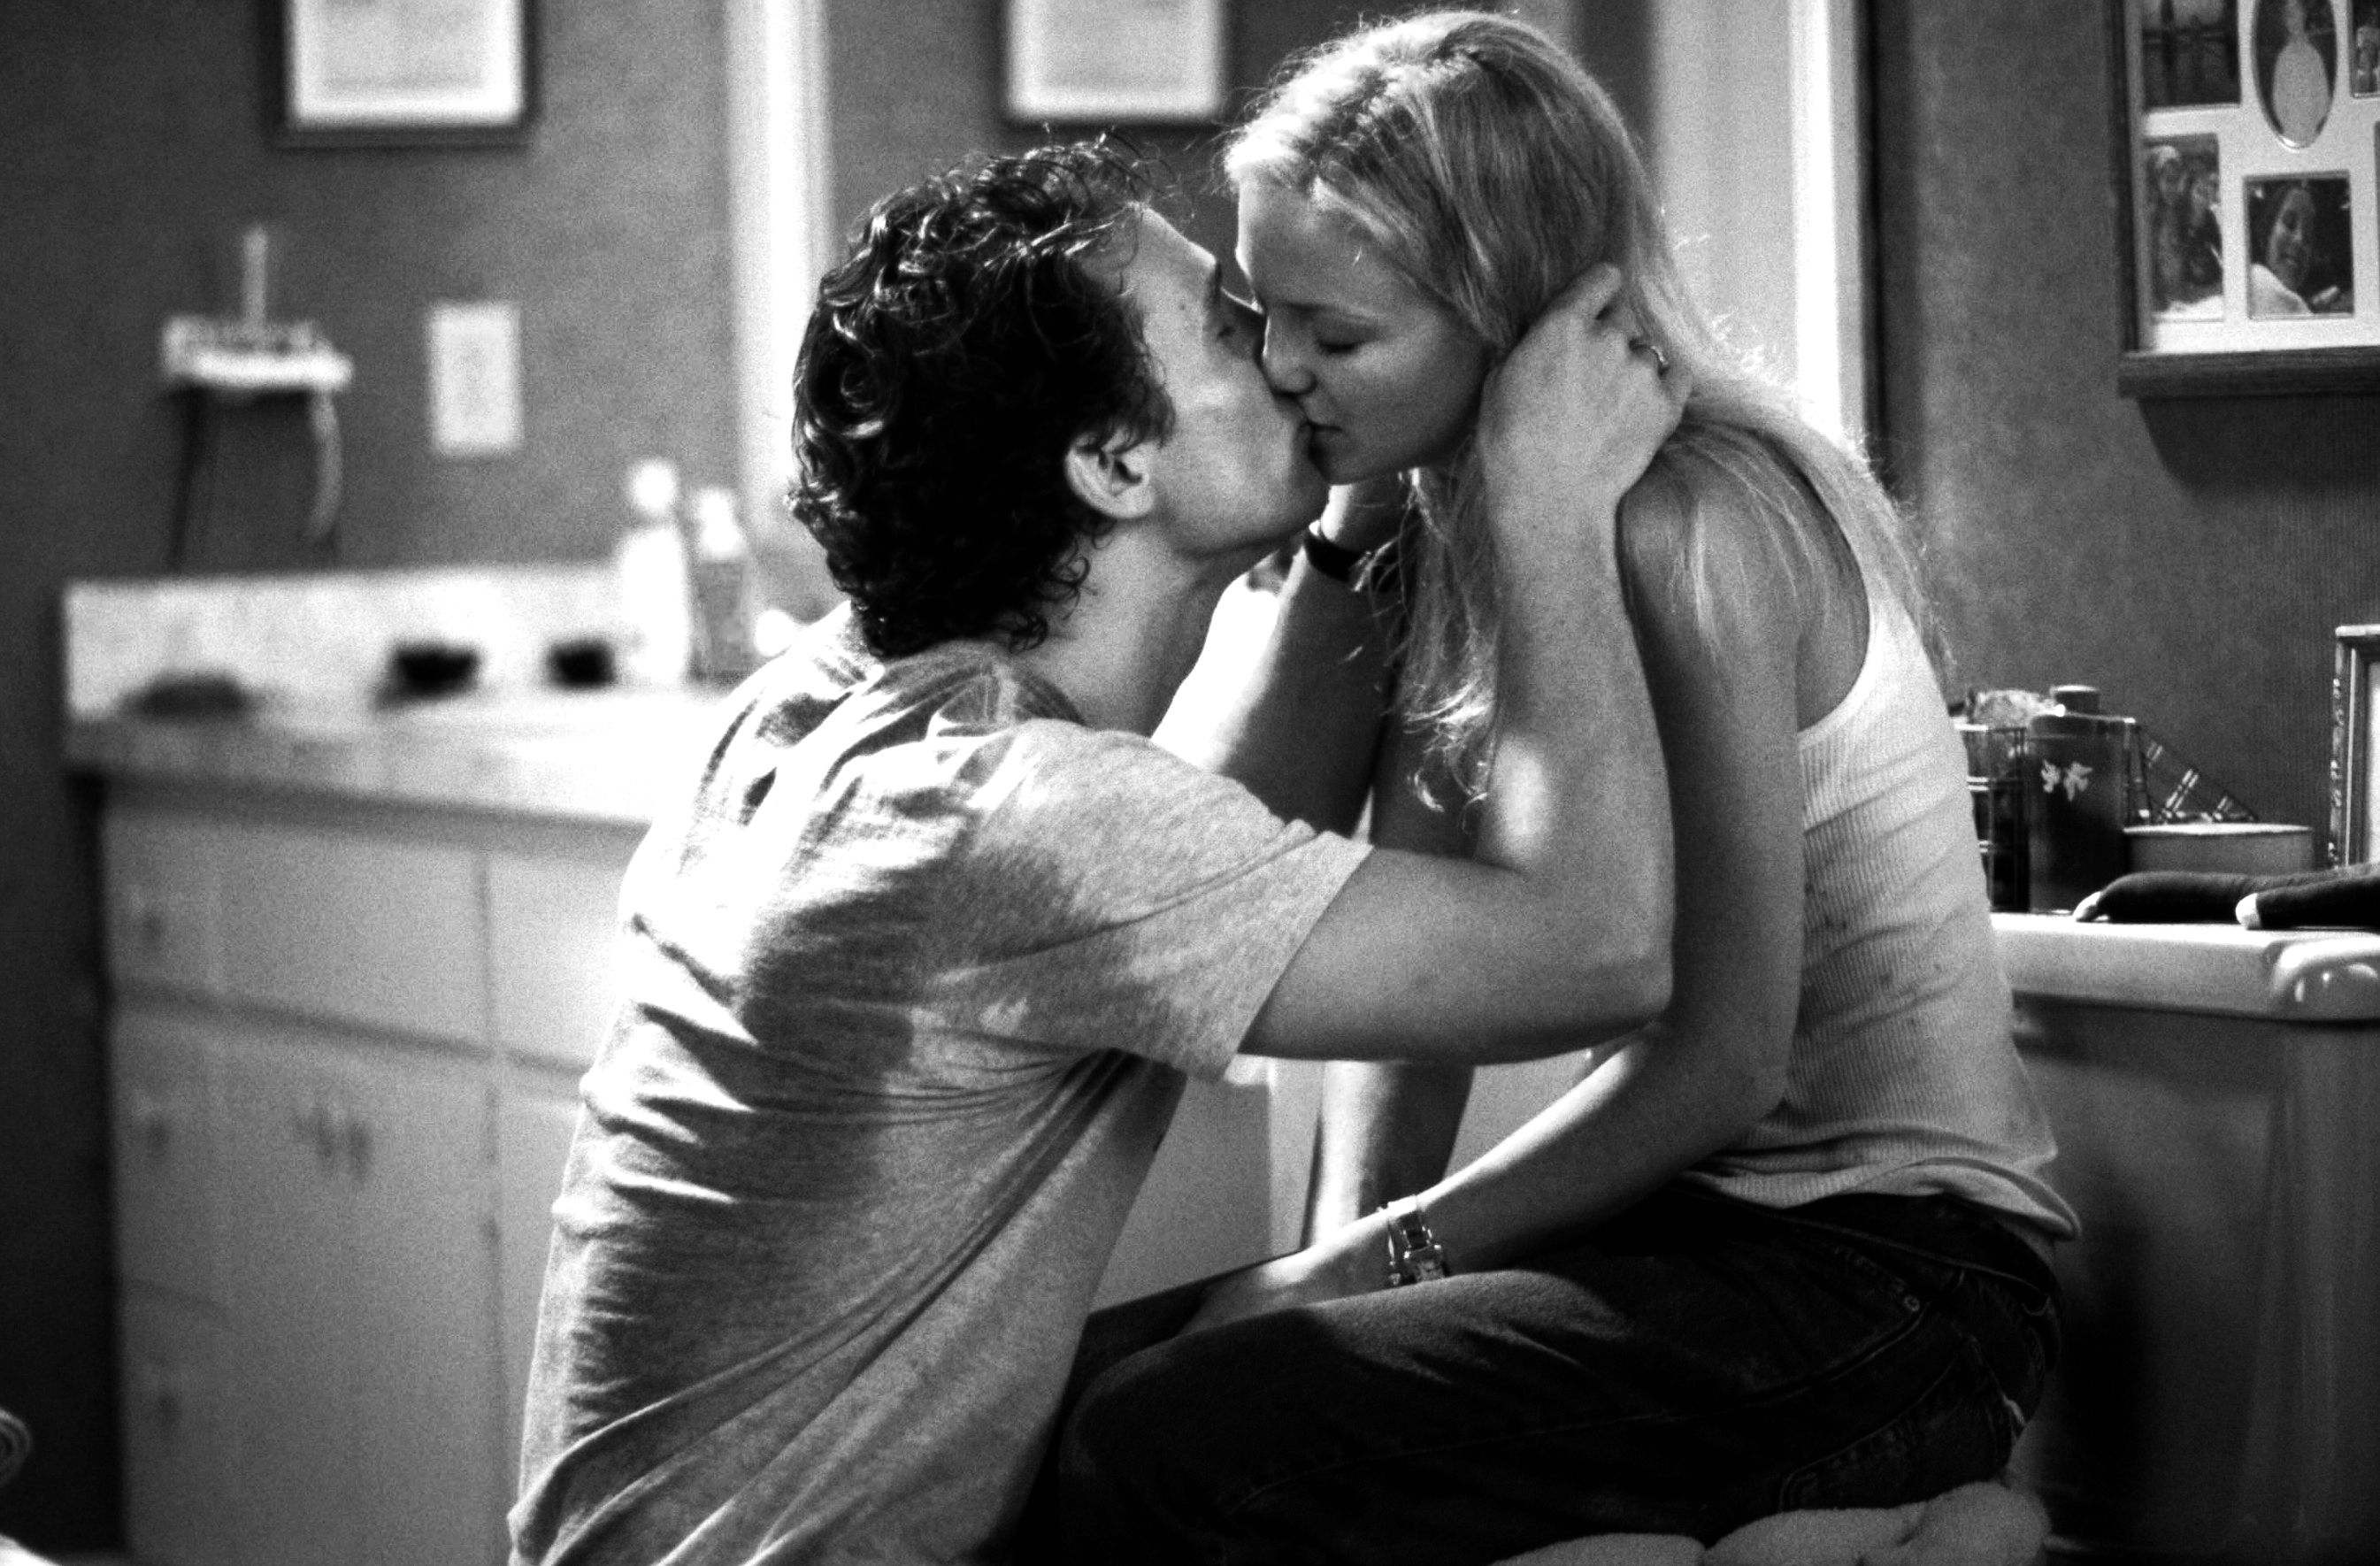 50 Sexiest Kisses From Movies - Sexiest Kissing Scenes Ever